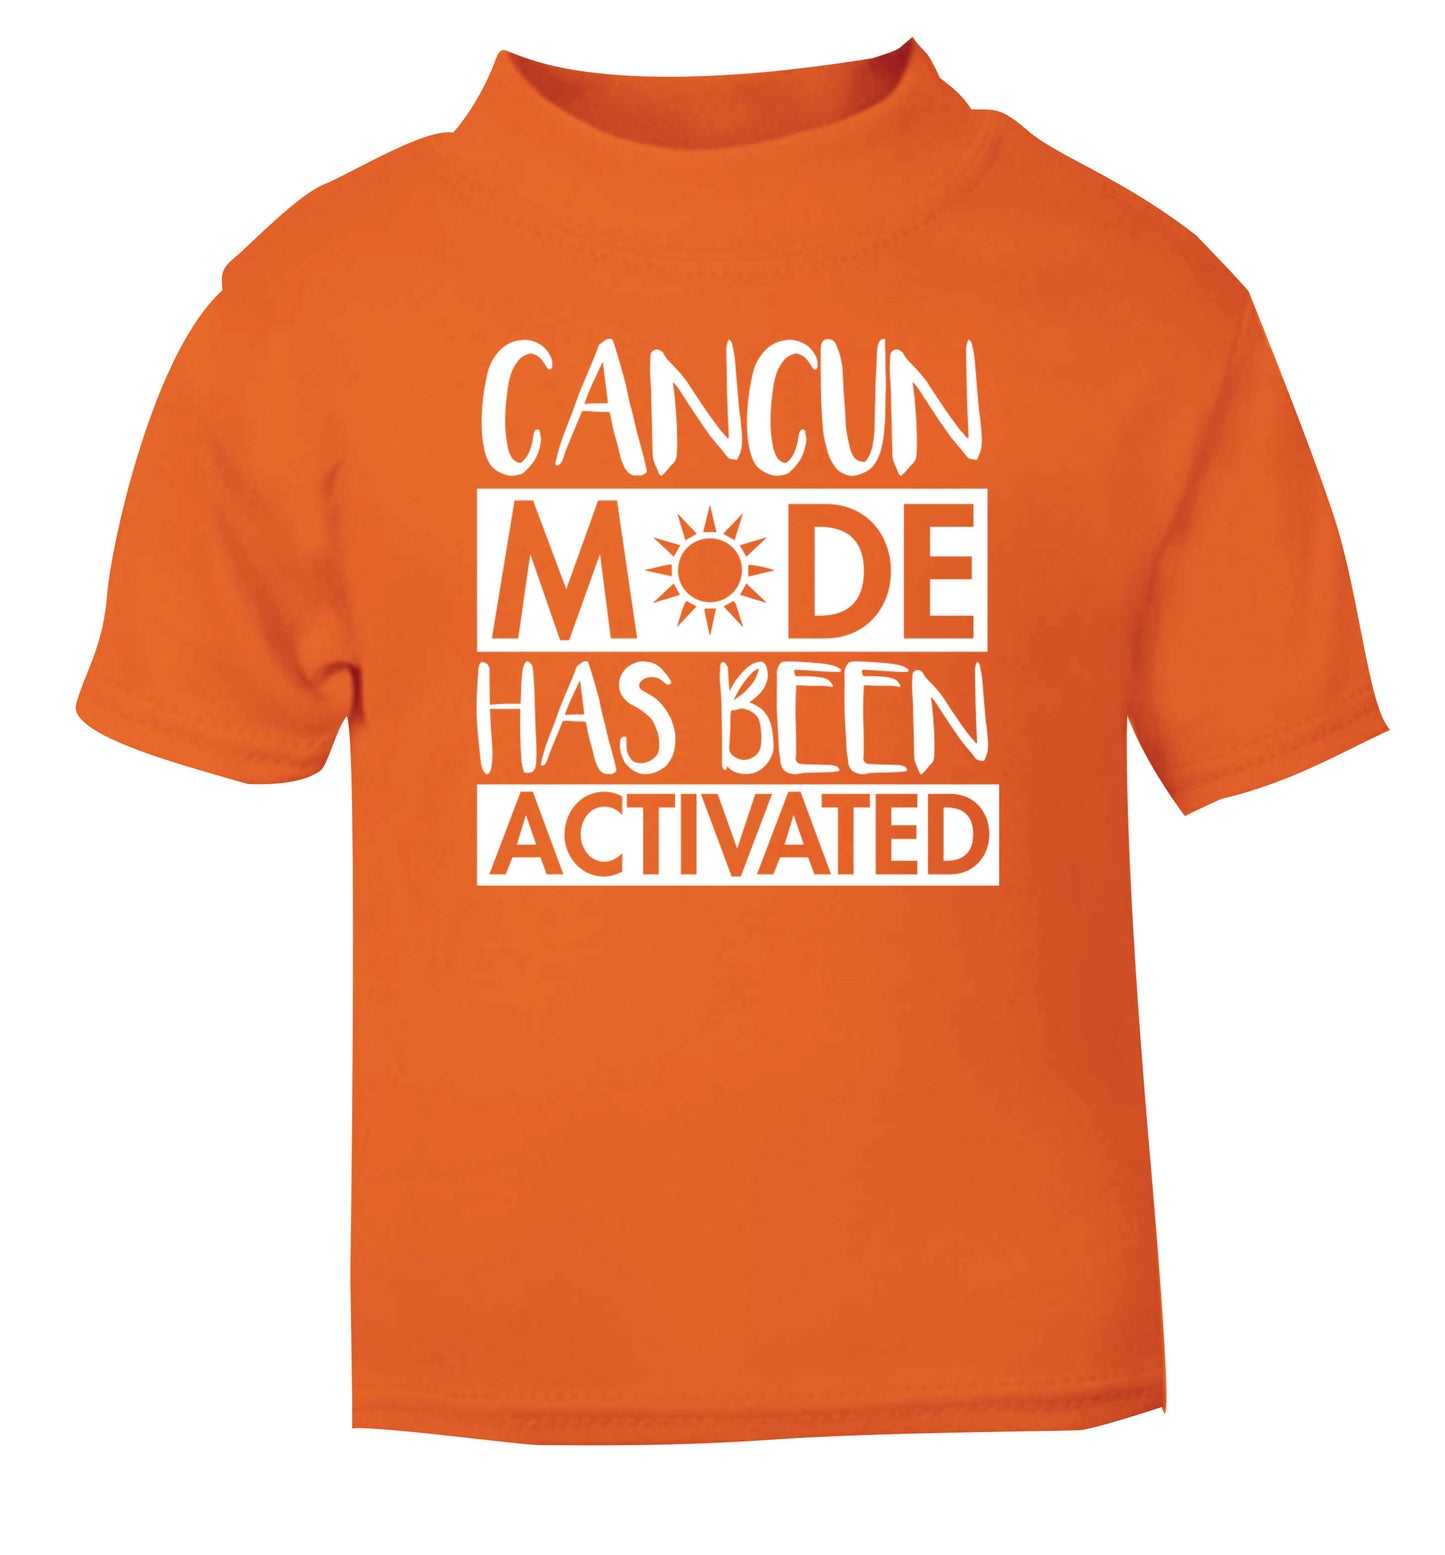 Cancun mode has been activated orange Baby Toddler Tshirt 2 Years